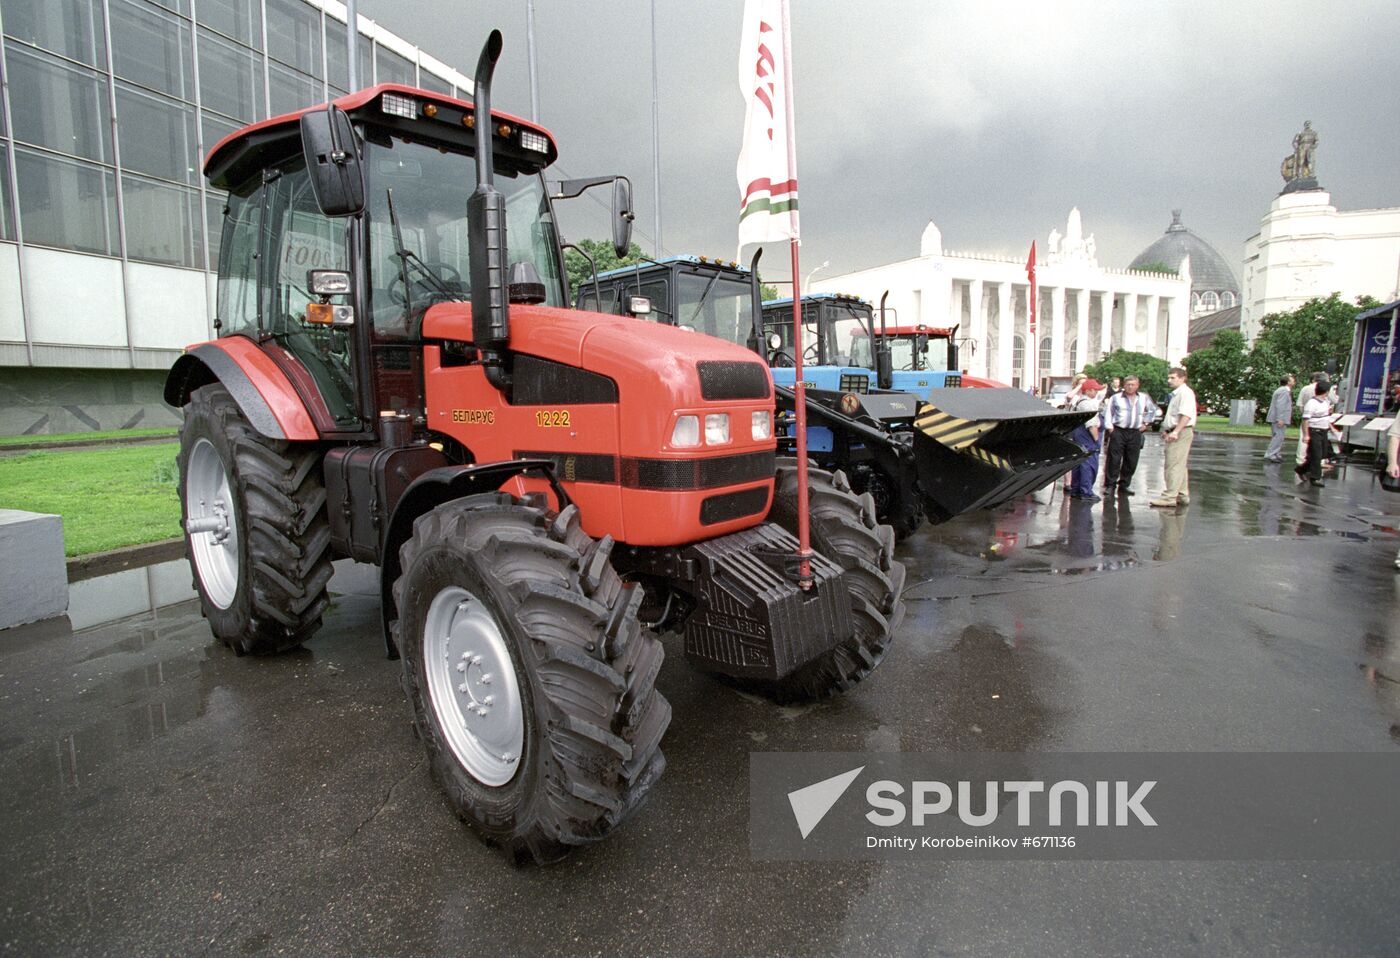 Belarus-2001 show exhibits at All-Russian Exhibition Center